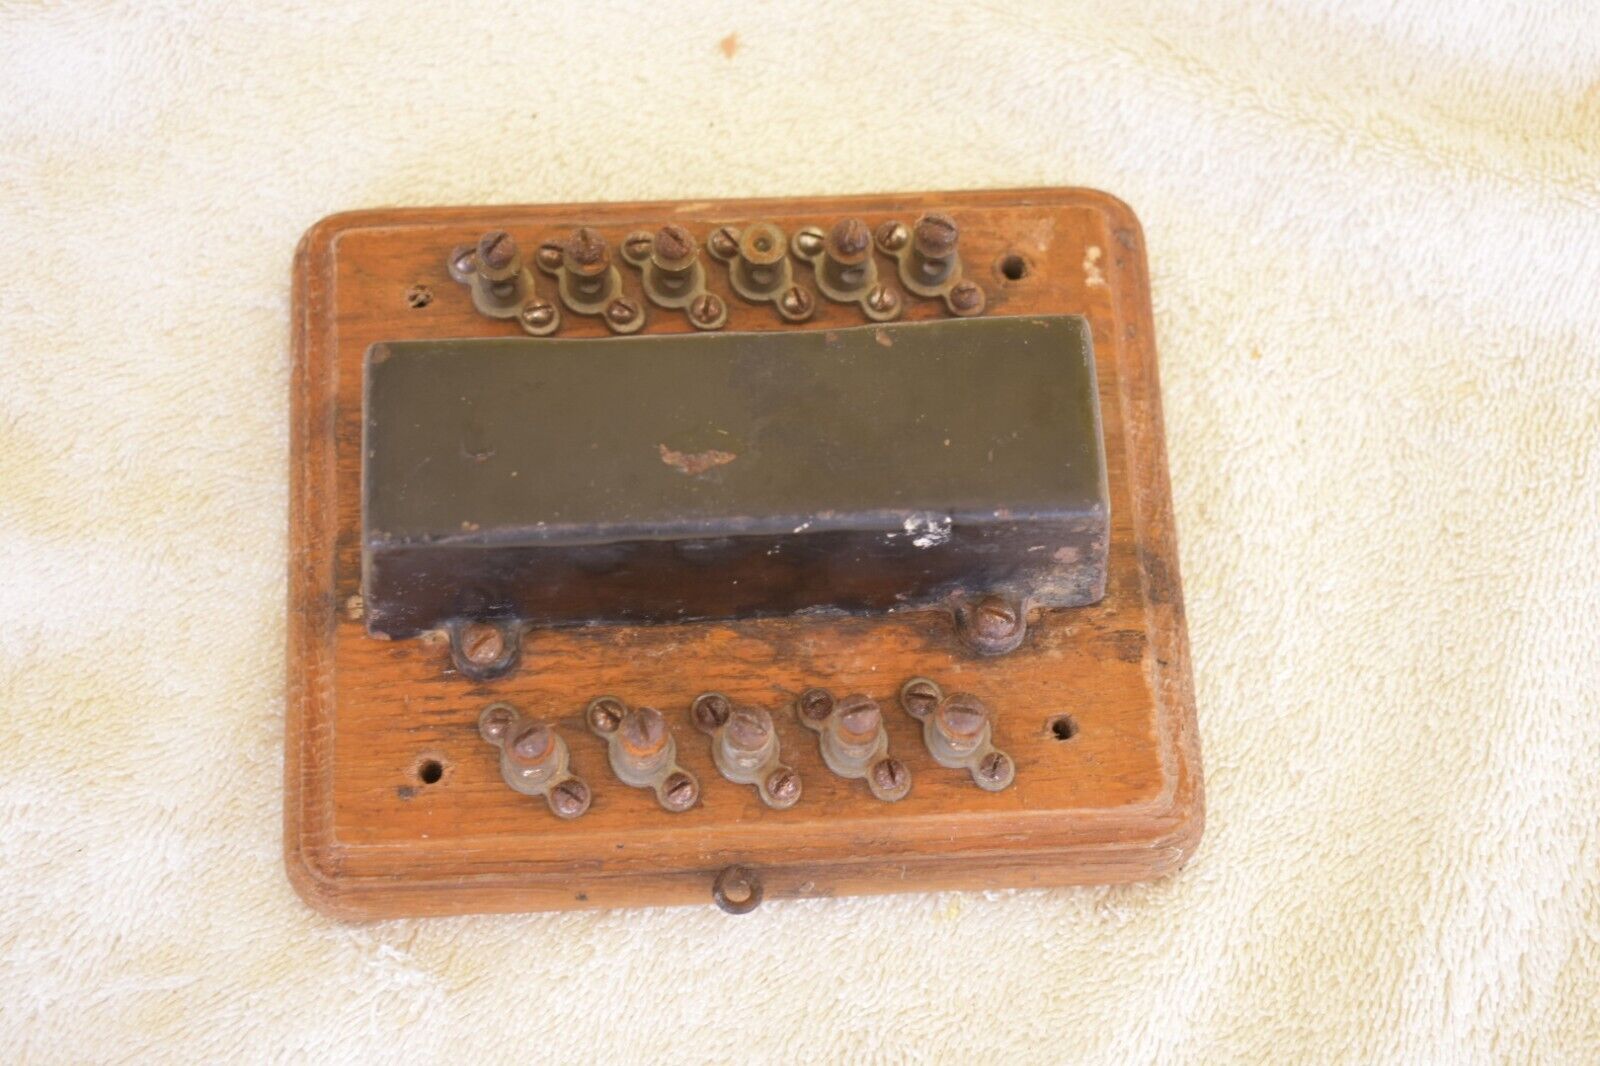 Wood Block and Coil with 11 terminals for Candlestick Telephone